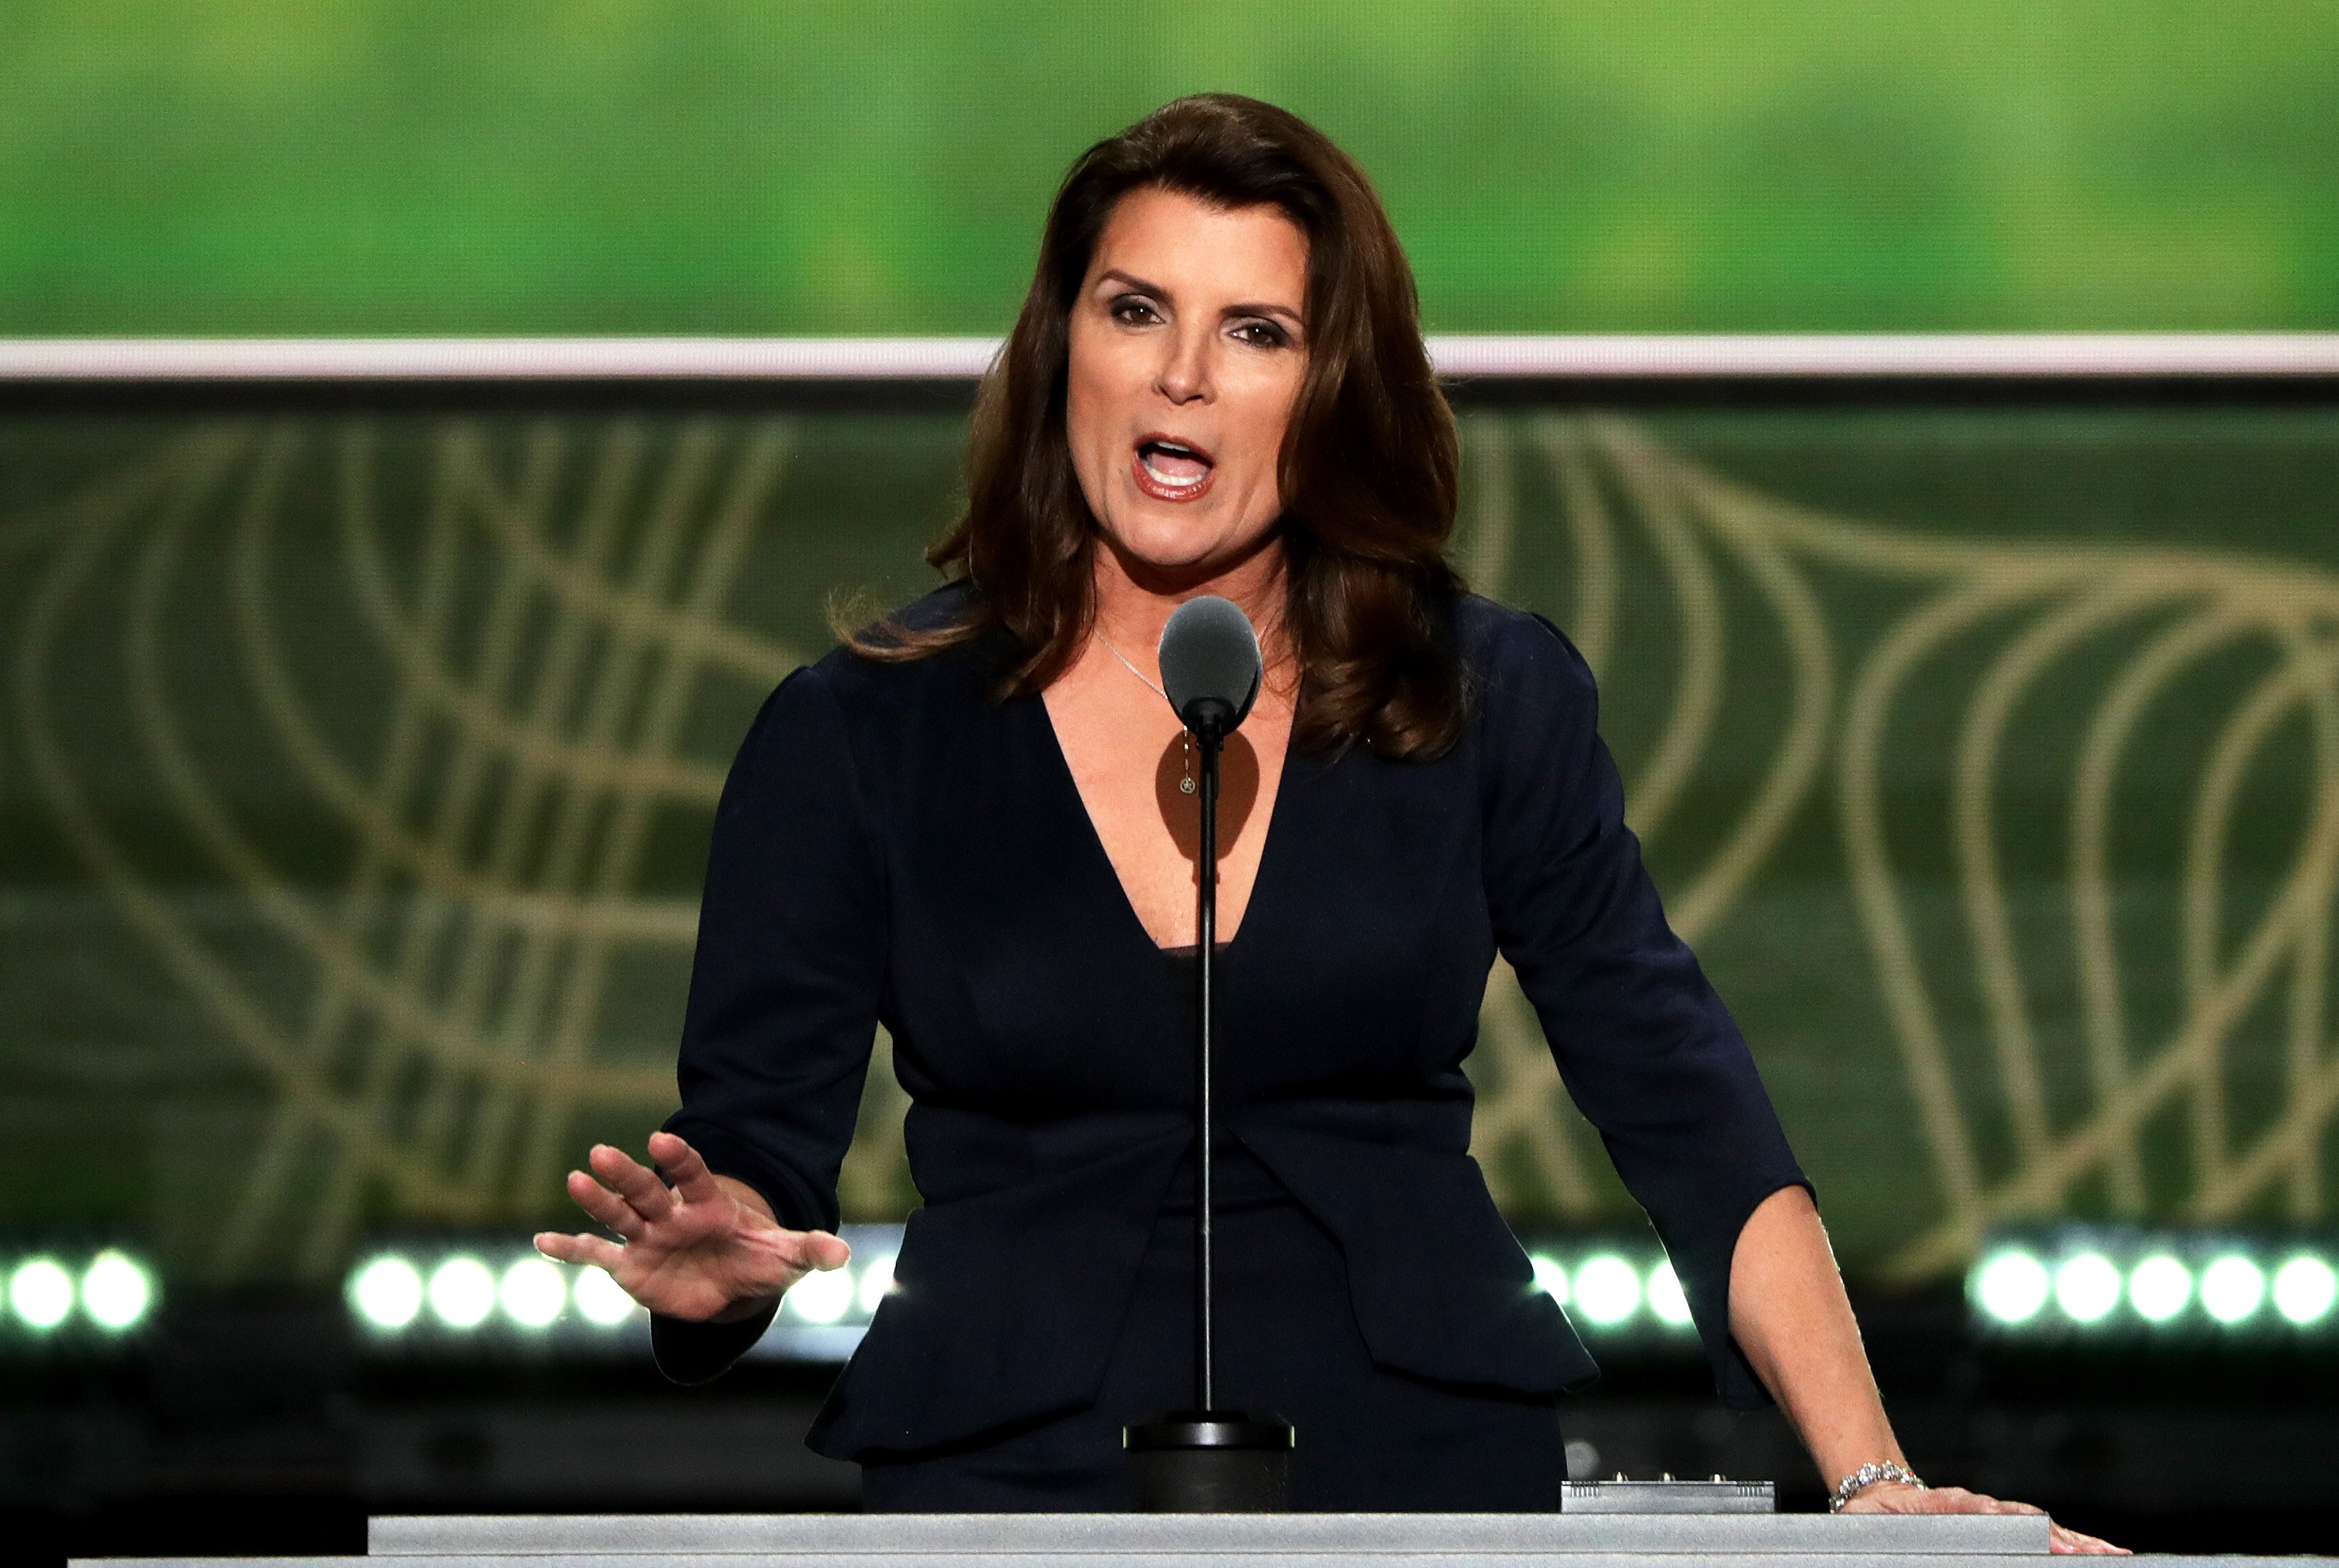 'The Bold and the Beautiful' star Kimberlin Brown speaking at the 2016 Republican National Convention.